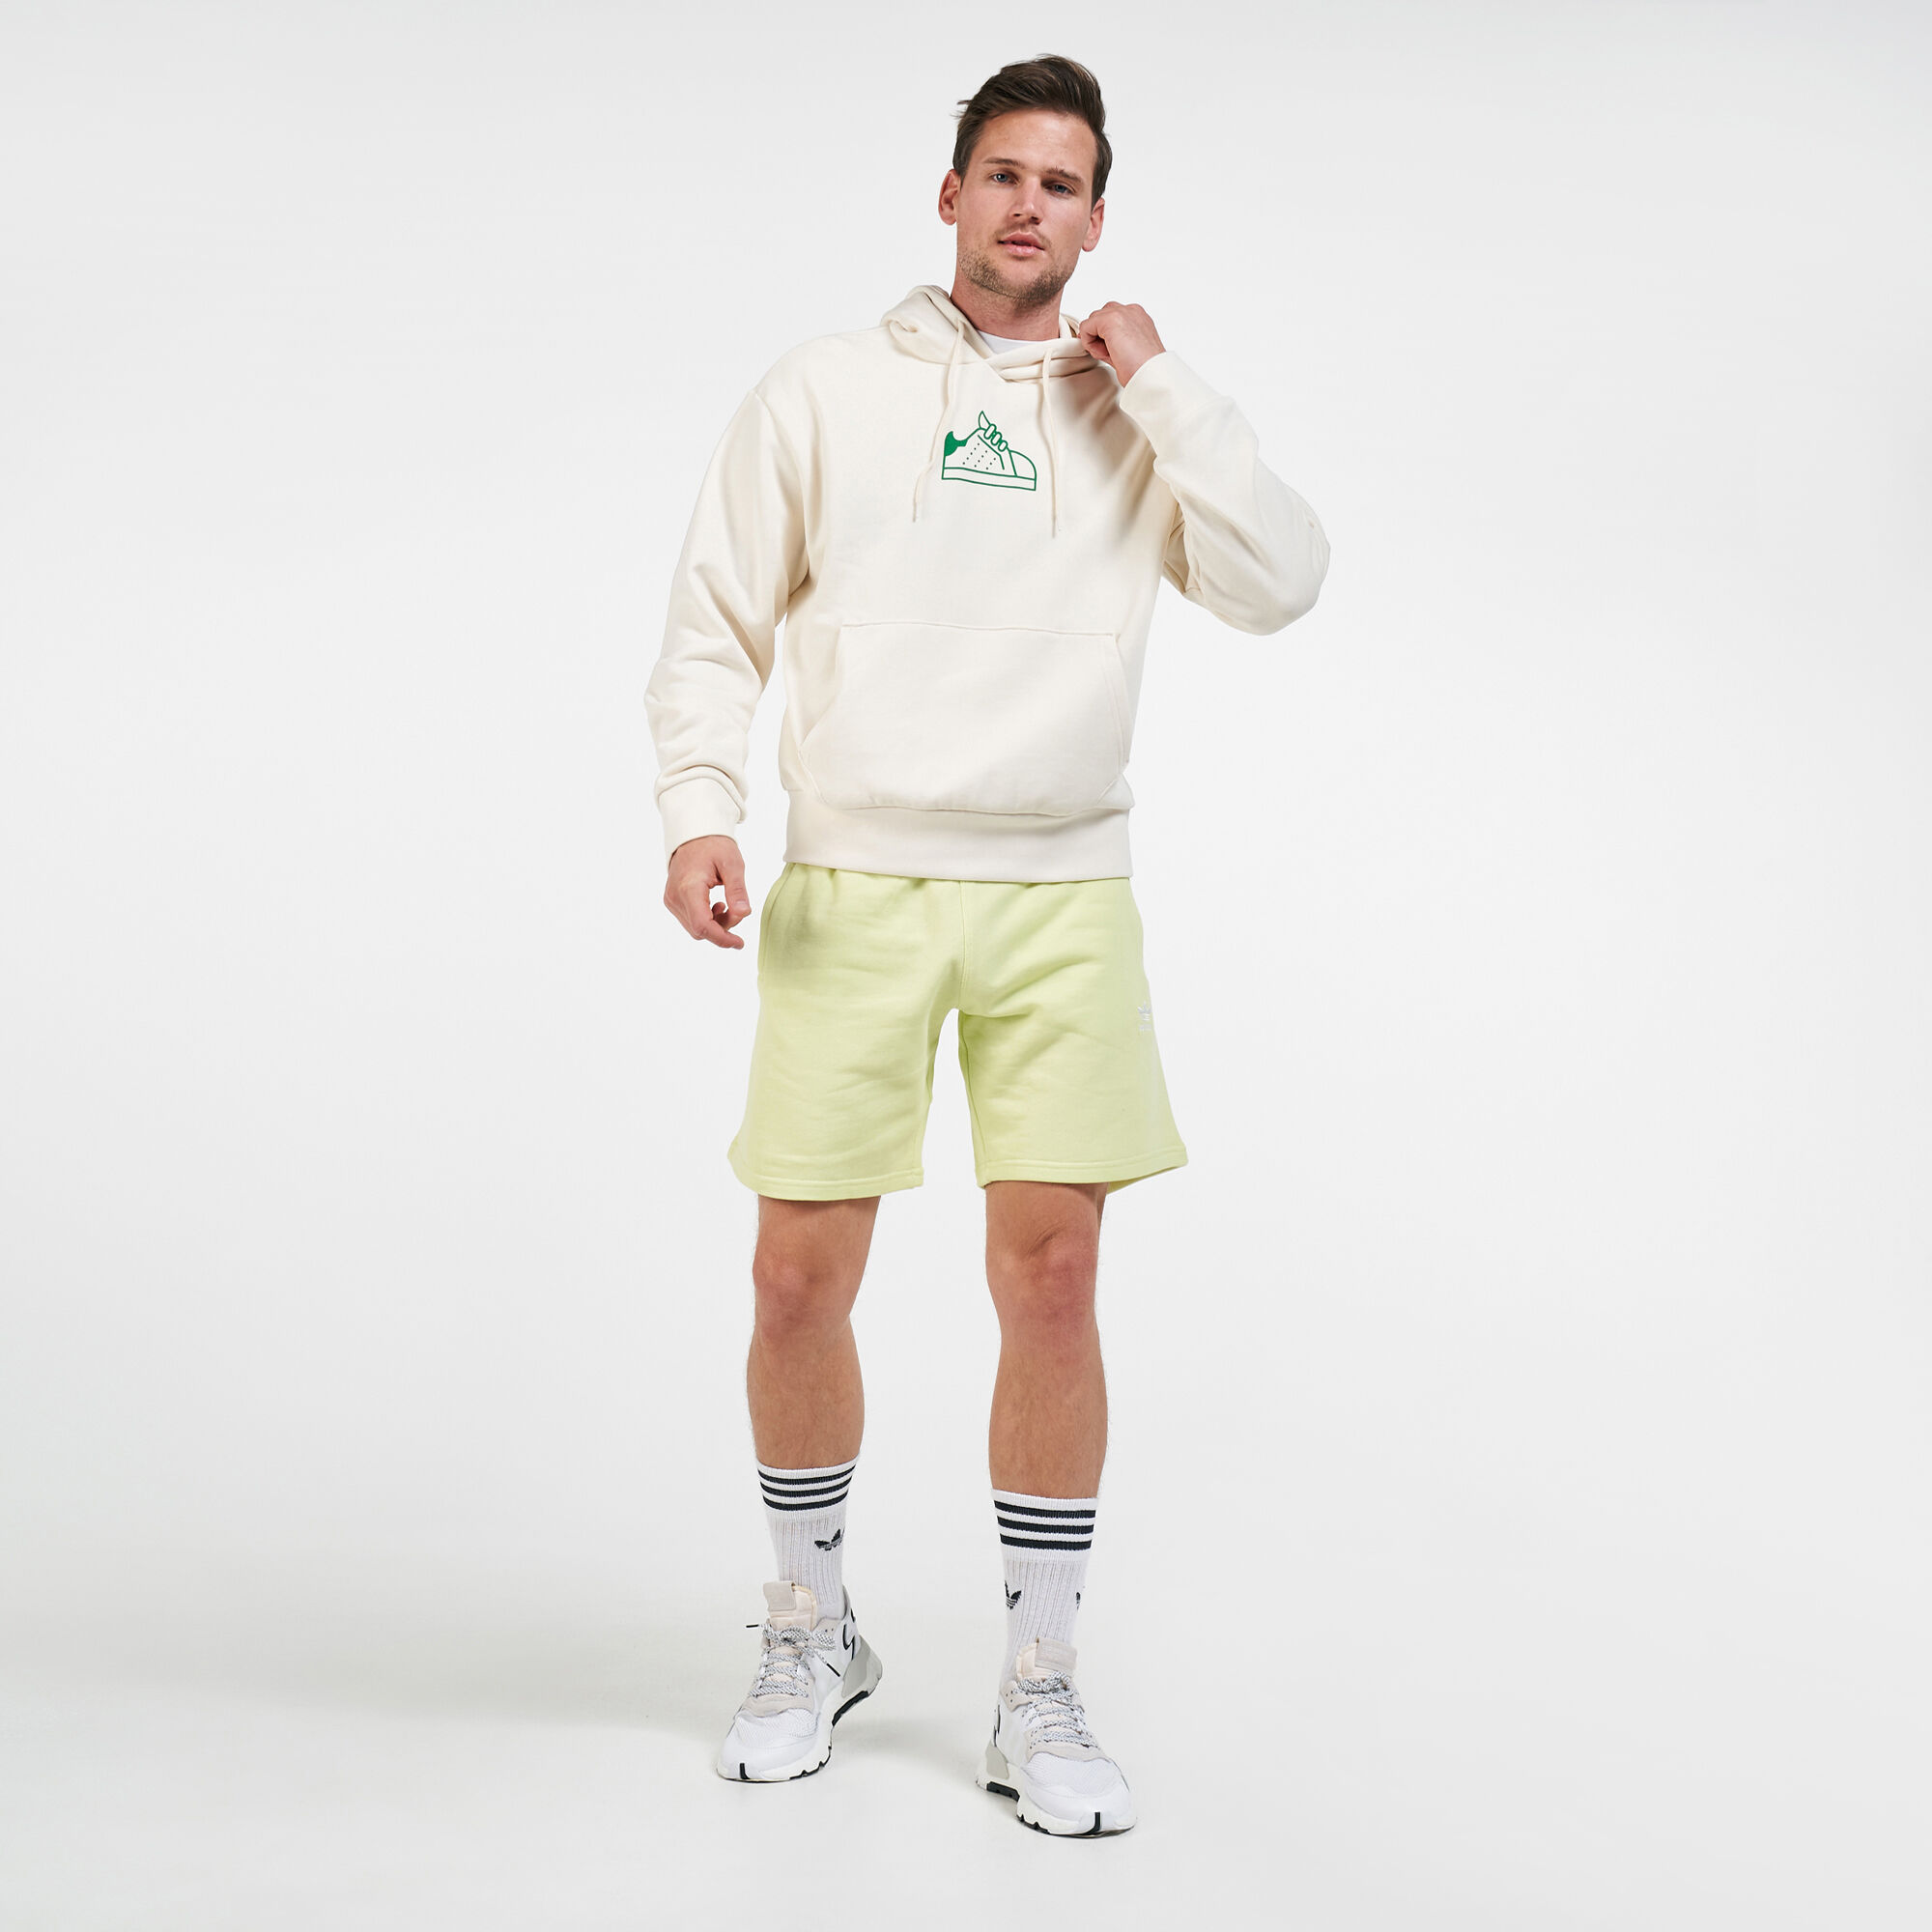 stan smith hoodie